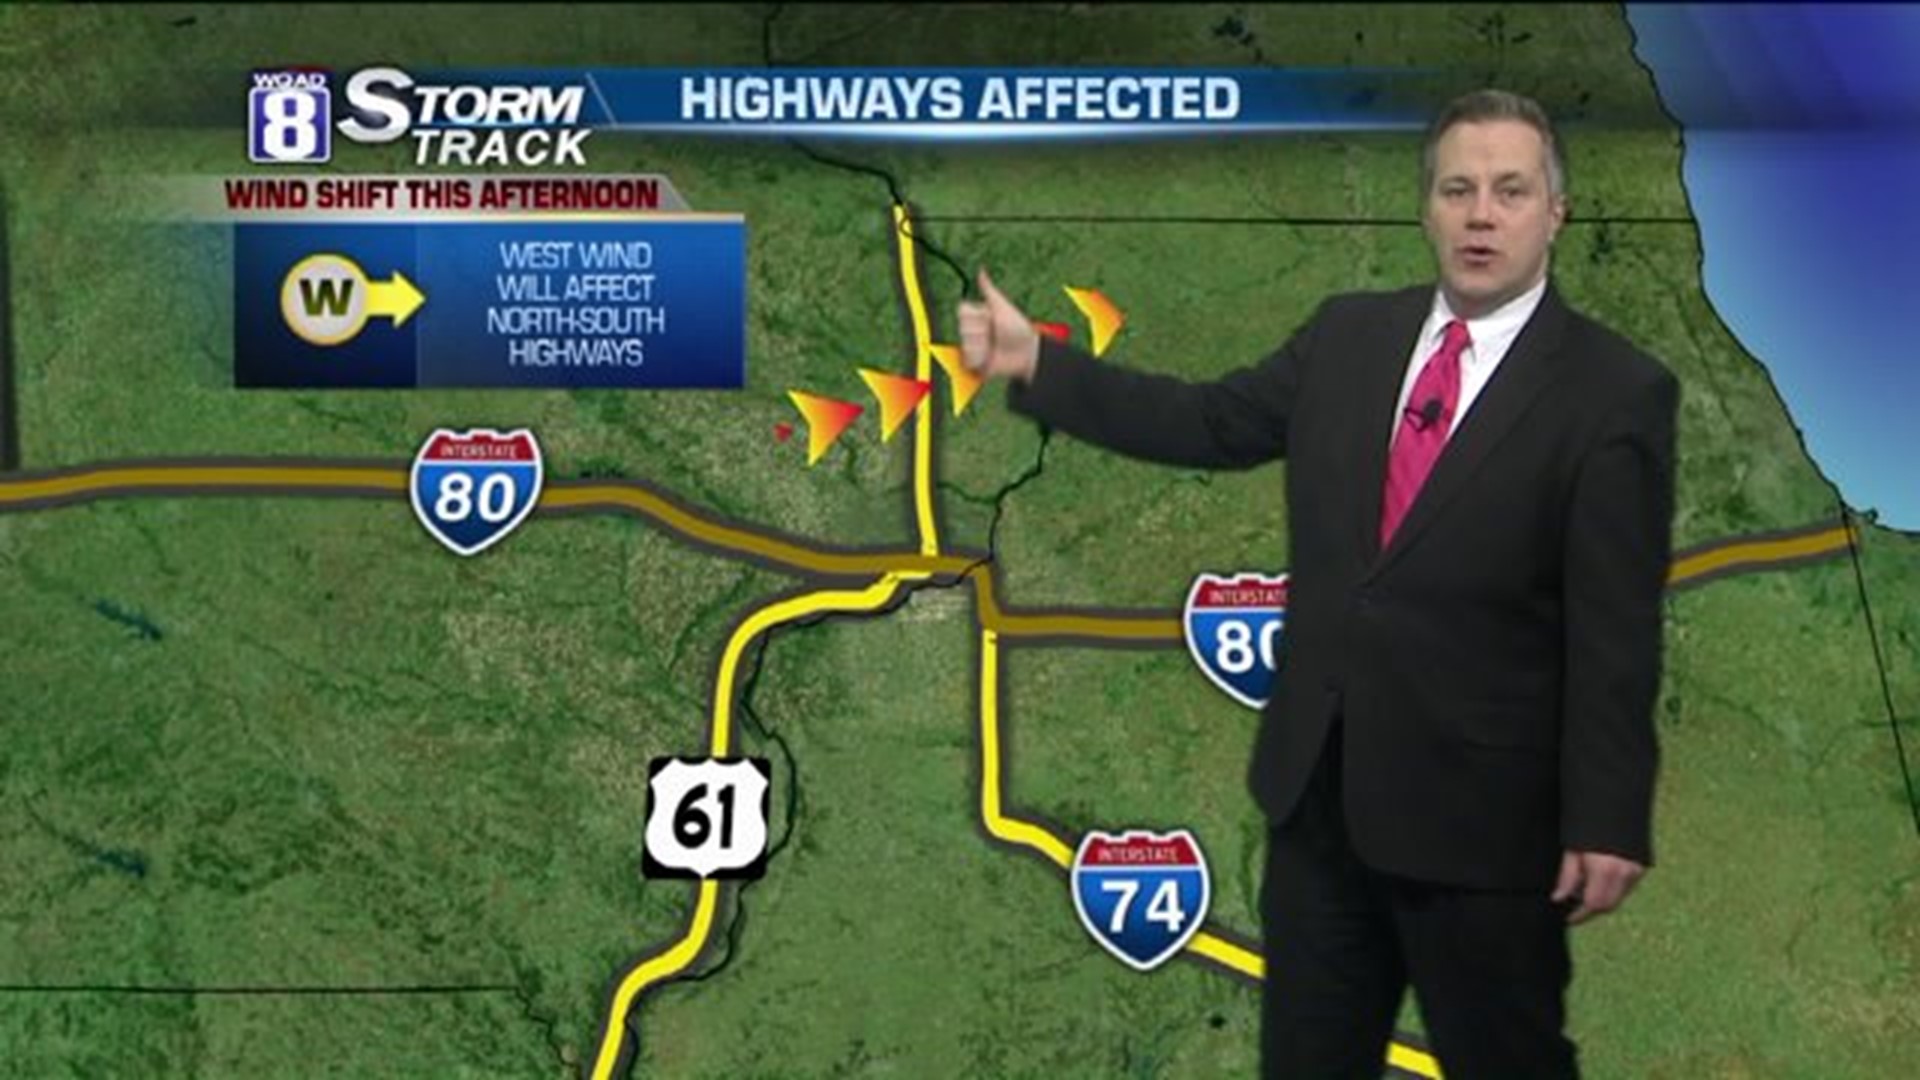 Eric explains how different interstates will be affected today